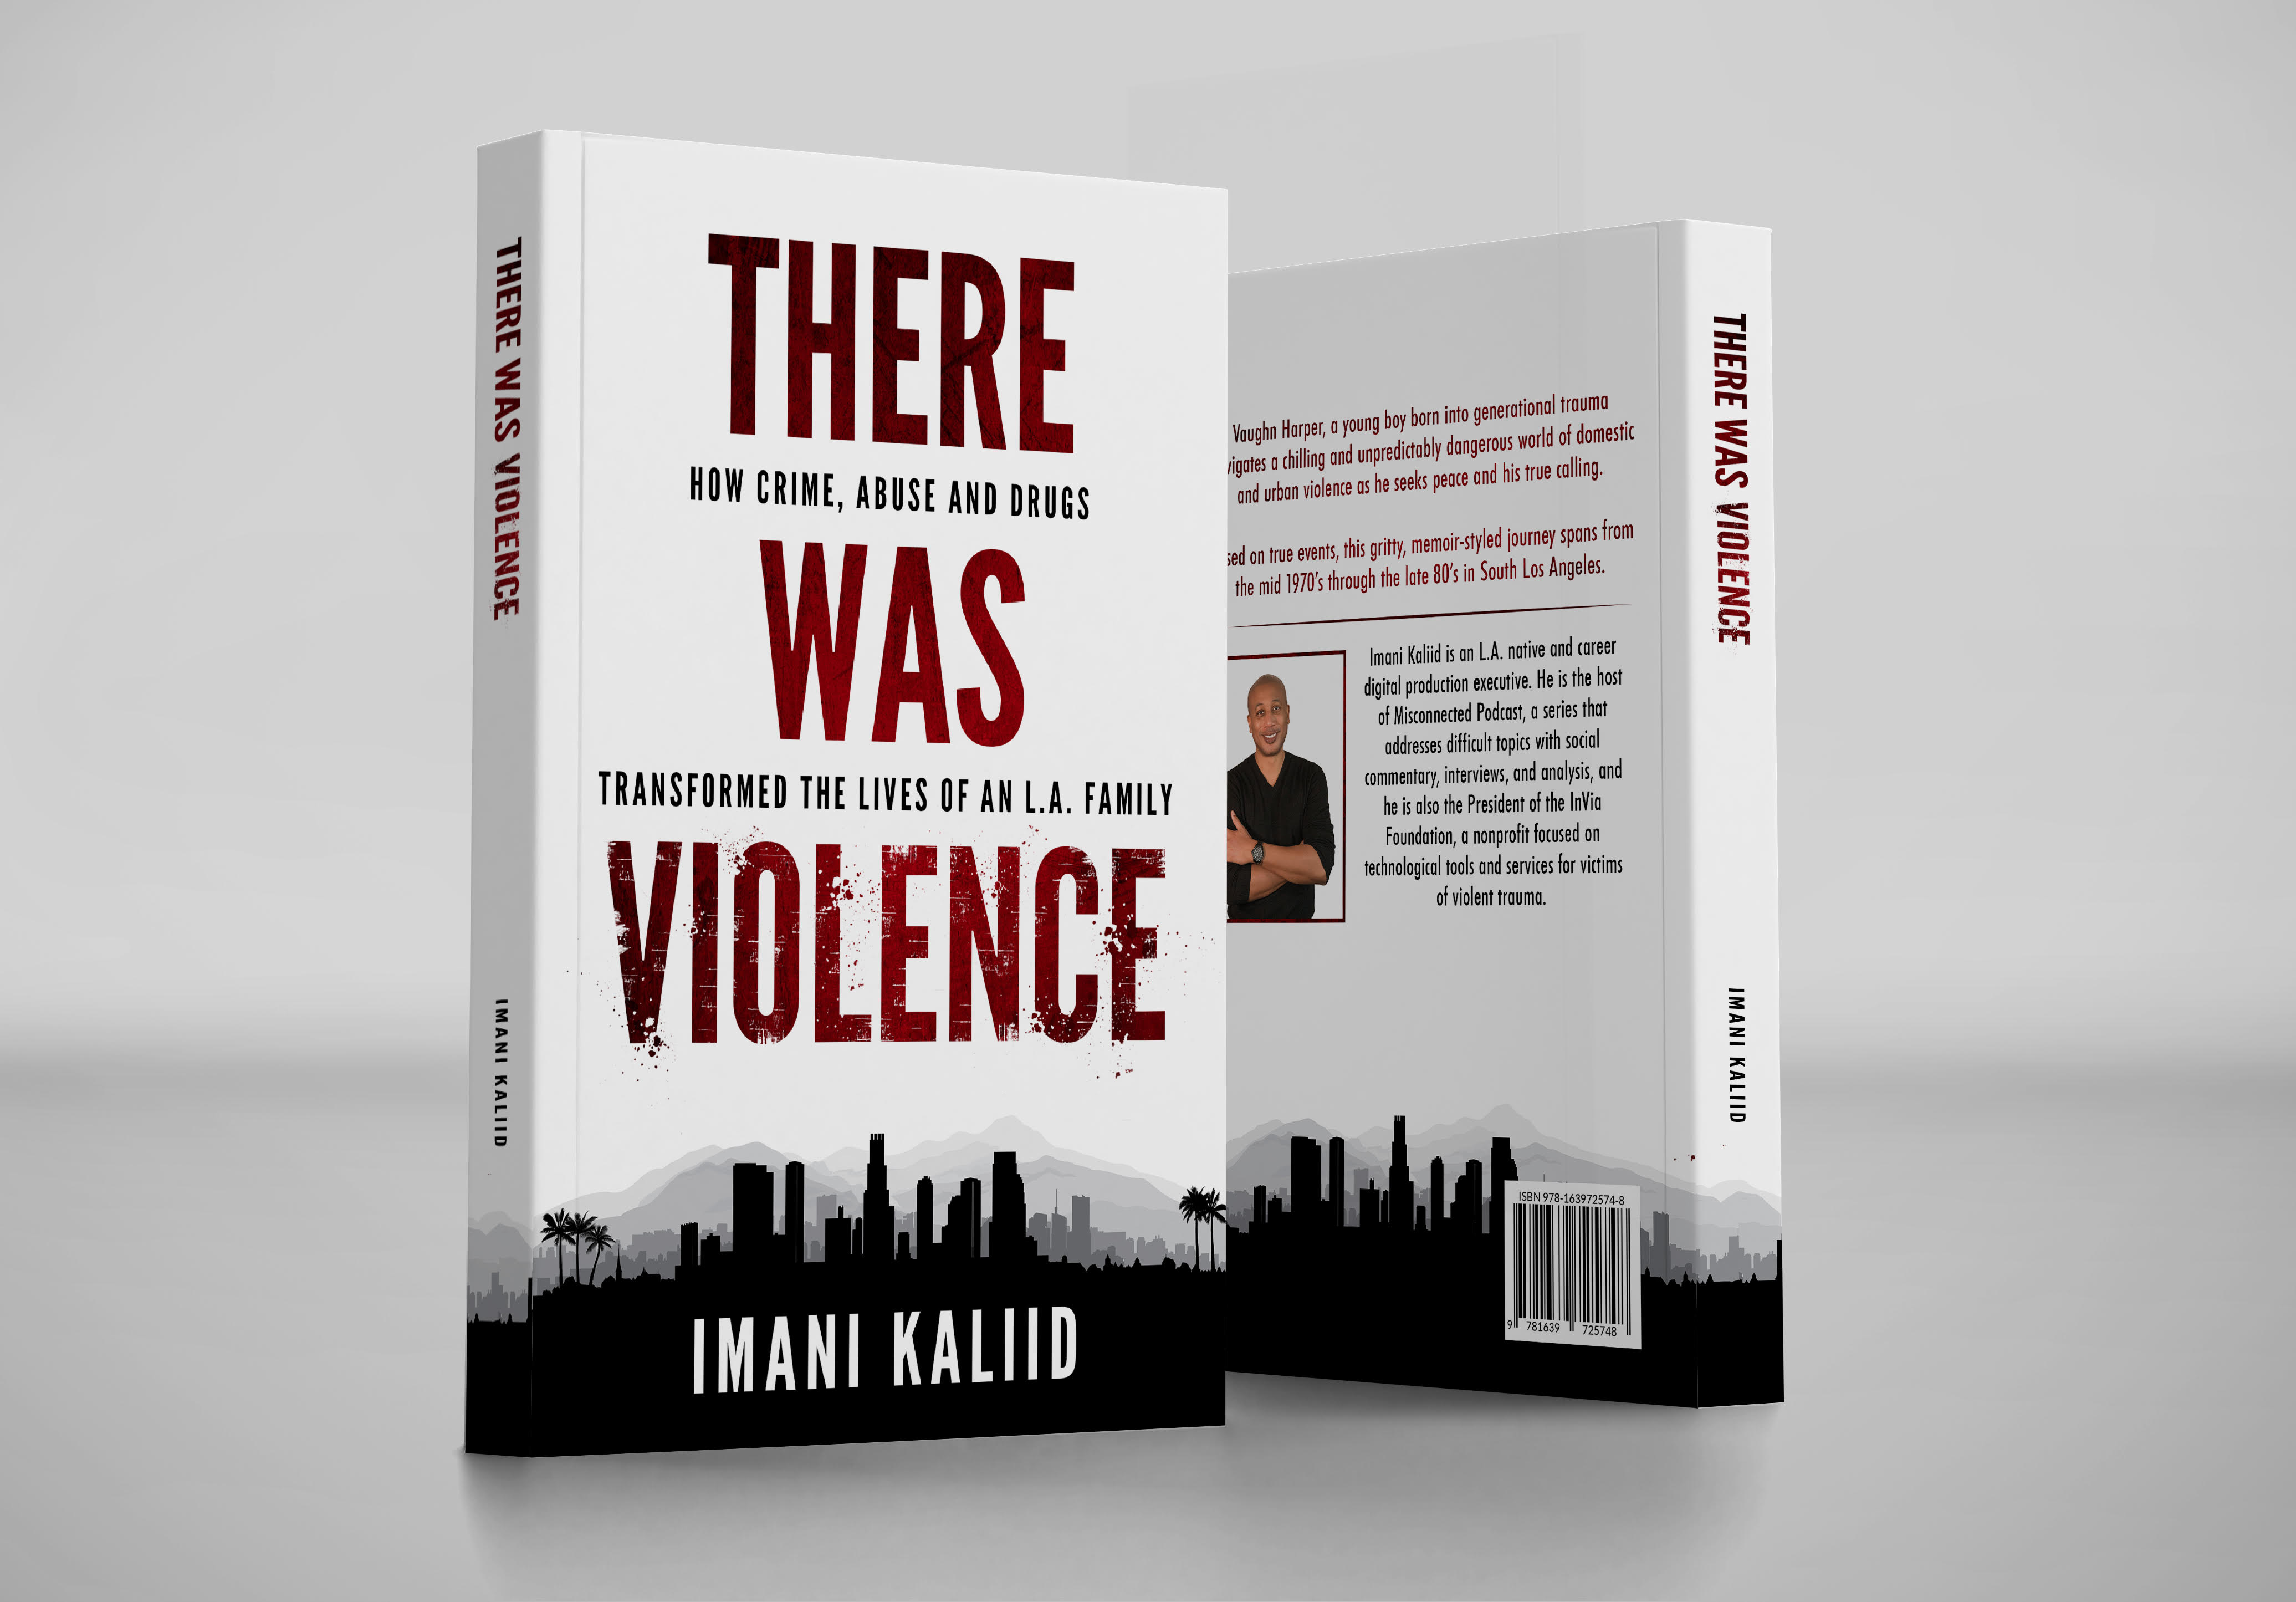 As Domestic and Street Violence Continue to Rise, Imani Kaliid Shares His Story of Survival and Free Mobile App to Save Victims in Distress